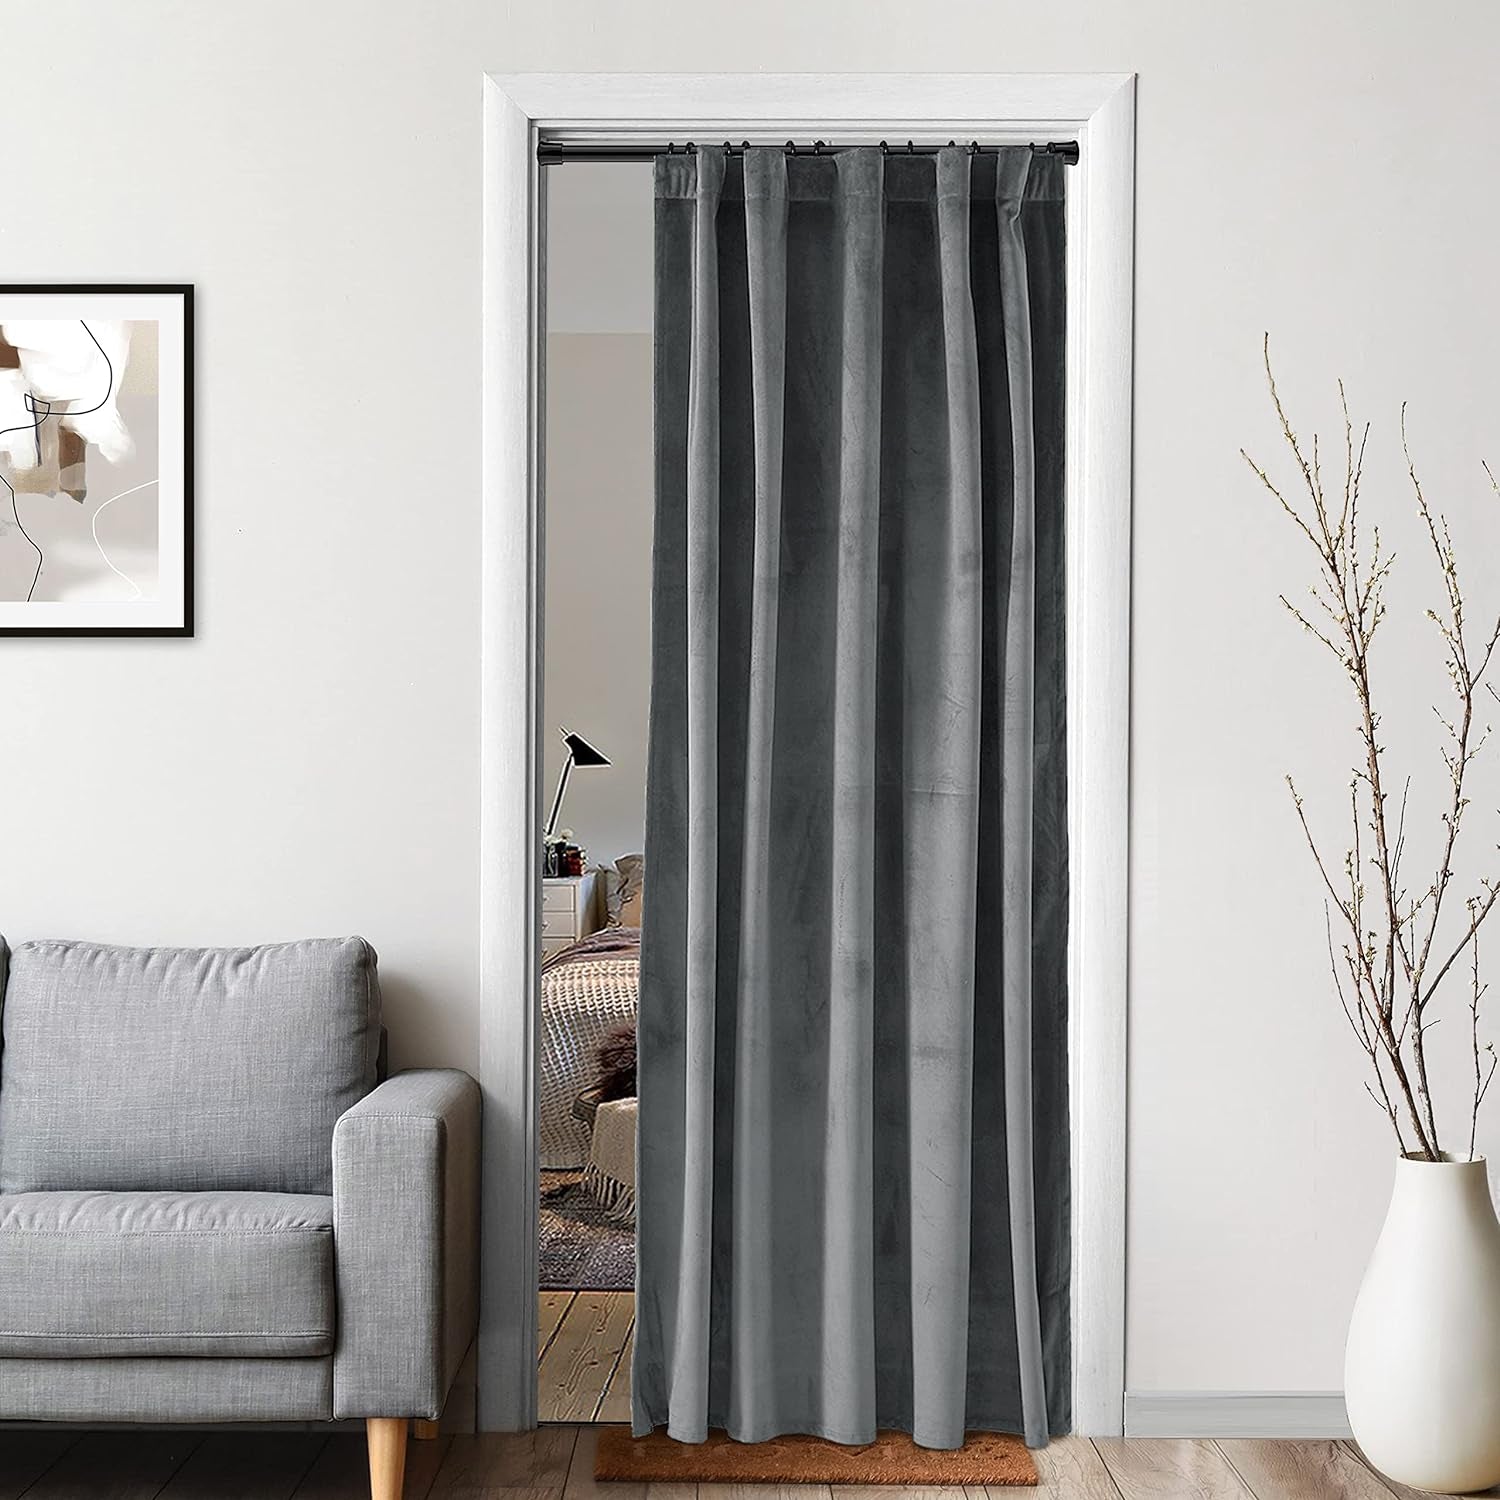 XTMYI Velvet Blackout Door Curtain Panels for Bedroom,Thermal Insulated Winter Warm Back Tab Rod Pocket Black Out Cover Doorway Curtains Privacy/Window Drapes,80 Inch Length  XTMYI TEXTILE Grey 52X80 